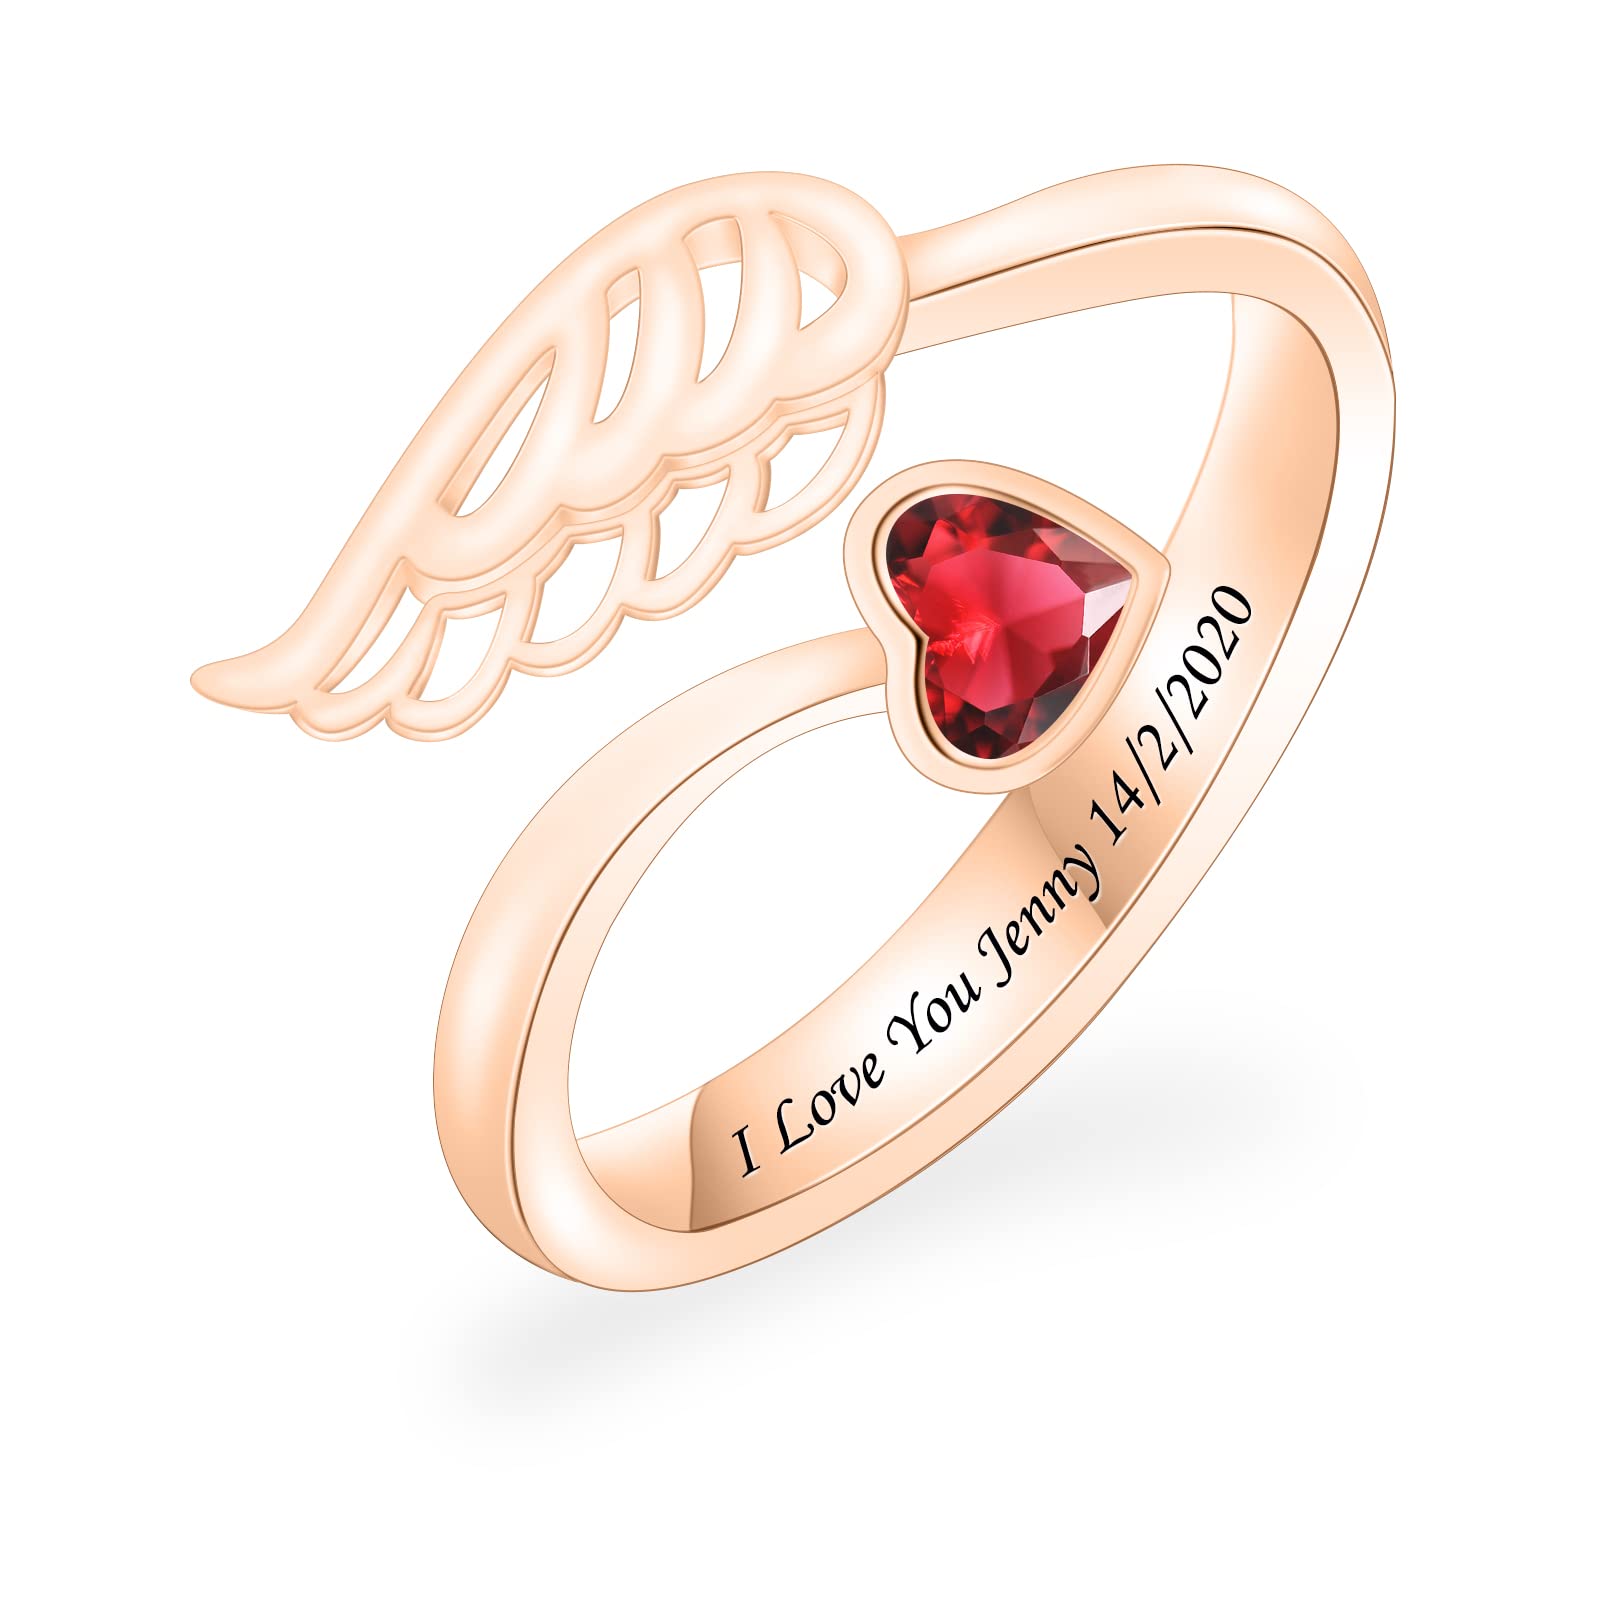 Personalized Angel Wing Birthstone Ring with Free Engraved Content-YITUB